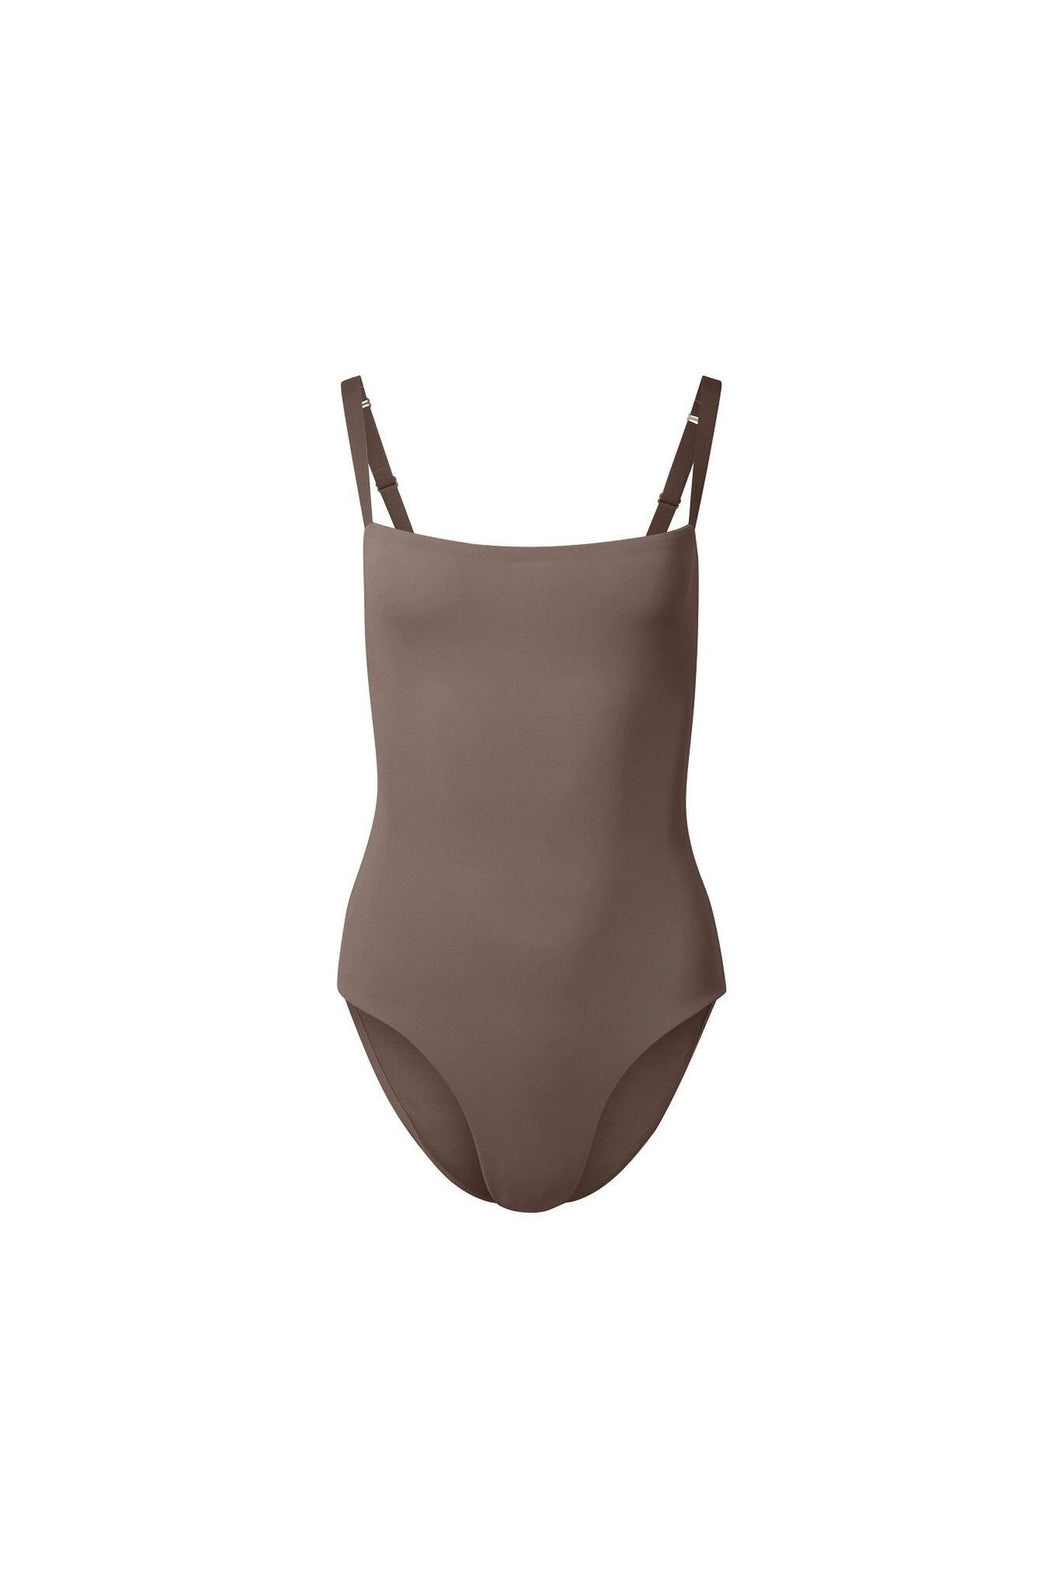 nueskin Mila in color Deep Taupe and shape bodysuit